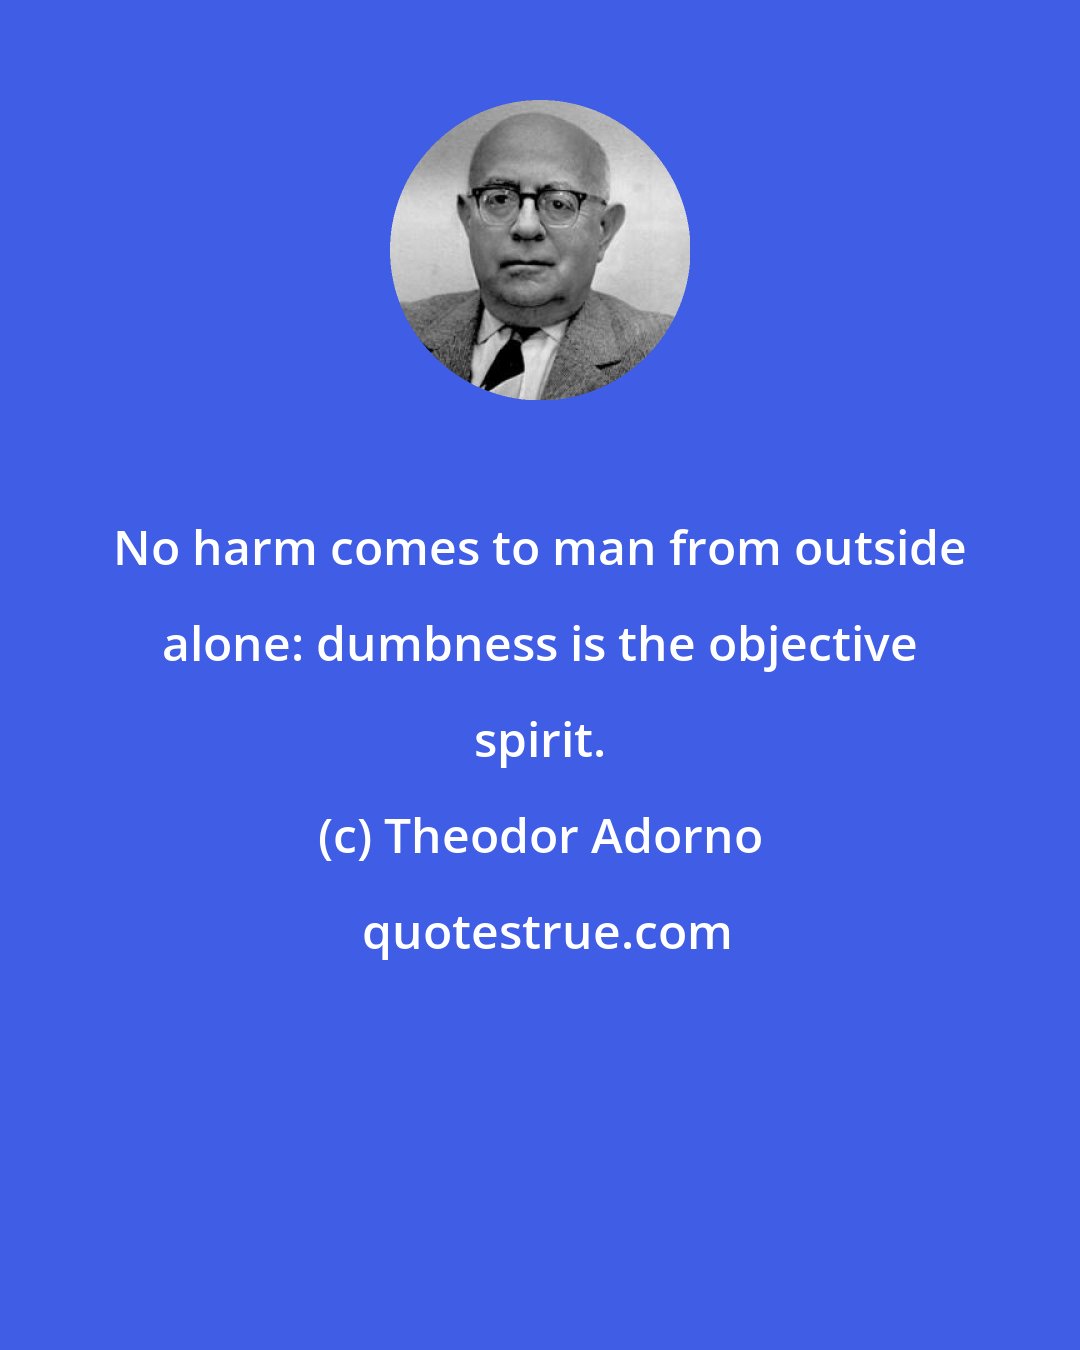 Theodor Adorno: No harm comes to man from outside alone: dumbness is the objective spirit.